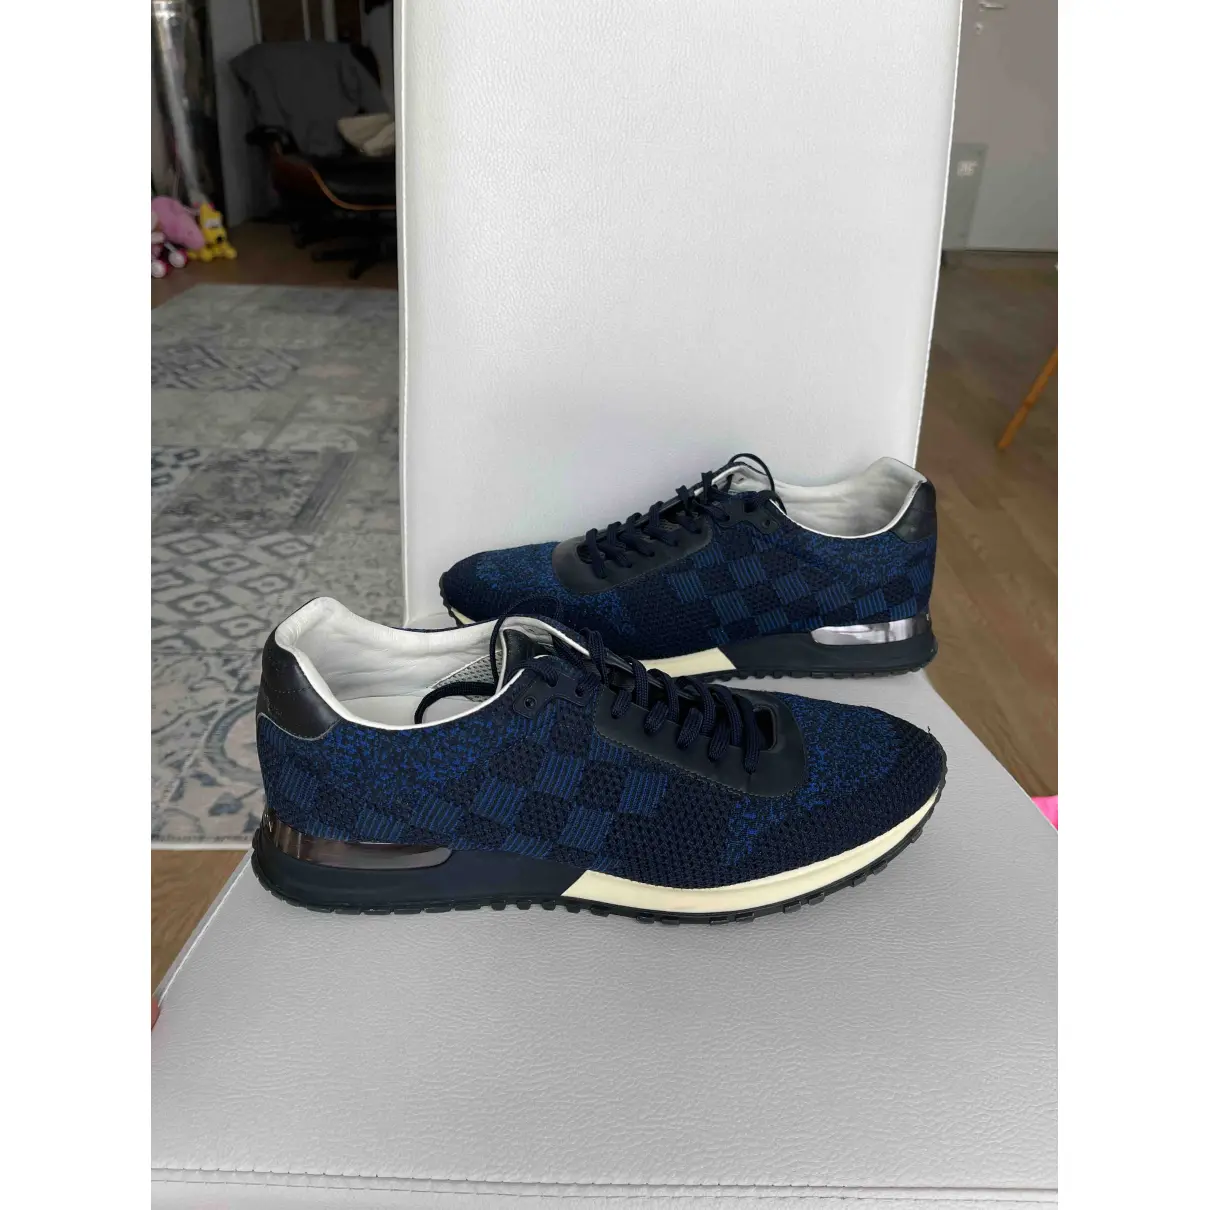 Buy Louis Vuitton LV Runner Active cloth low trainers online